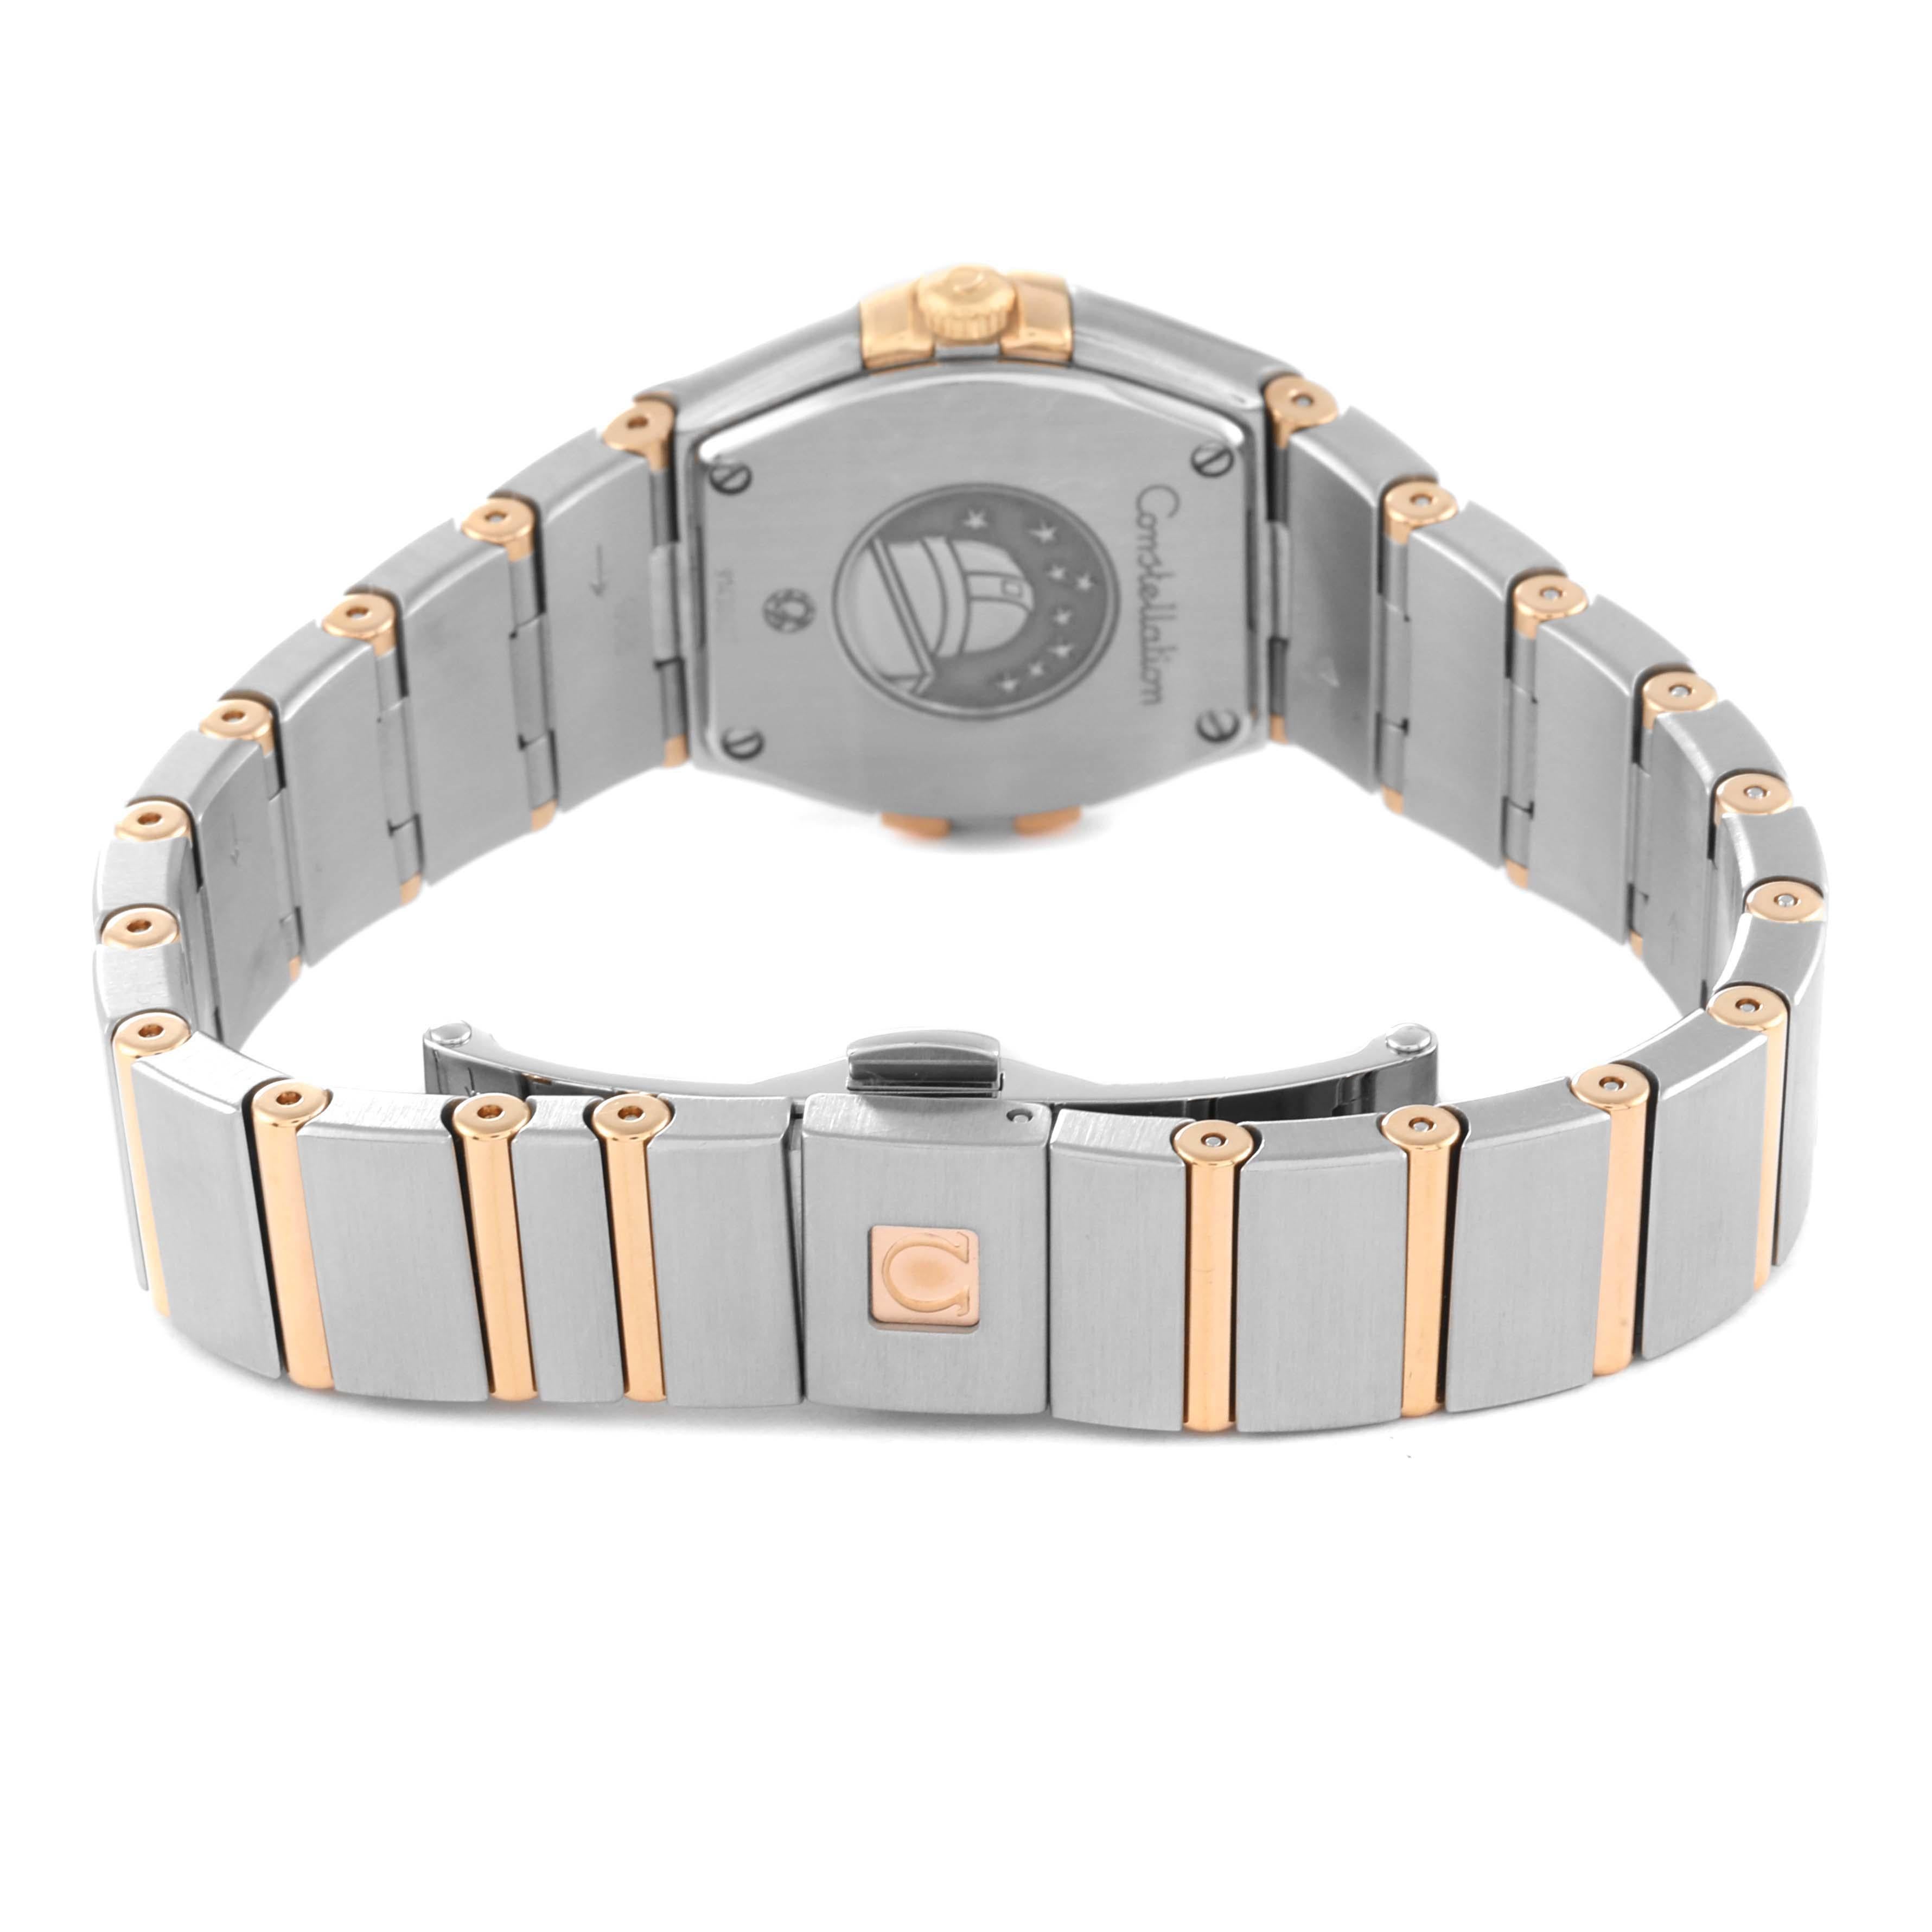 Omega Constellation Steel Rose Gold Diamond Ladies Watch 123.25.24.60.53.001 For Sale 3